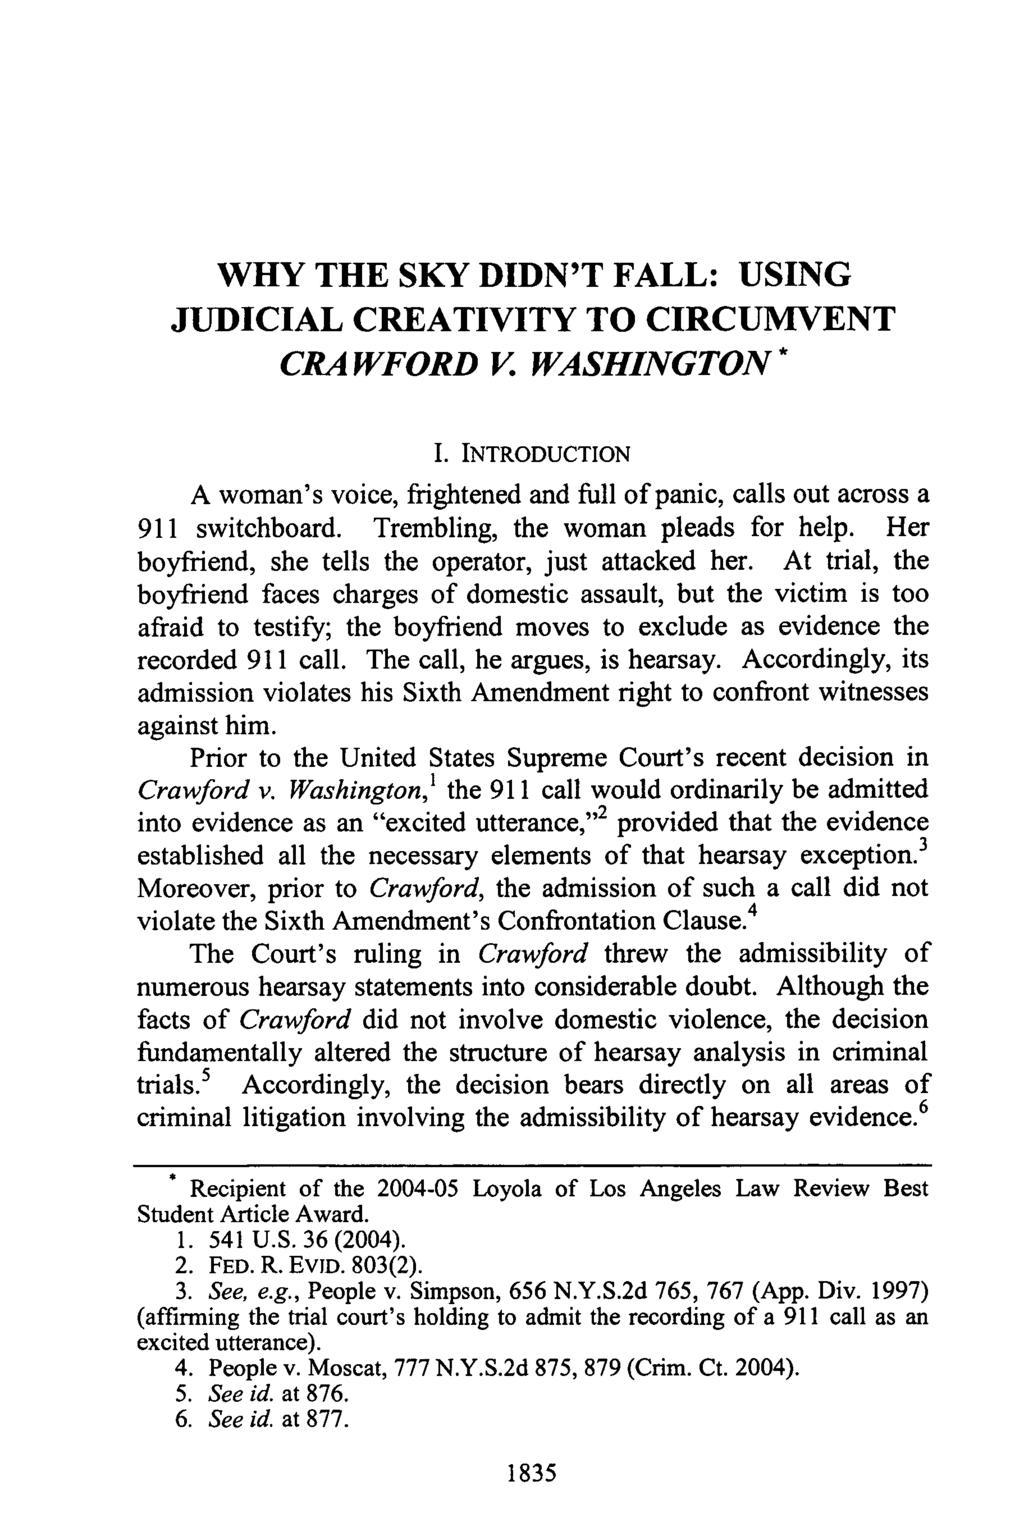 WHY THE SKY DIDN'T FALL: USING JUDICIAL CREATIVITY TO CIRCUMVENT CRA WFORD V. WASHINGTON * I. INTRODUCTION A woman's voice, frightened and full of panic, calls out across a 911 switchboard.